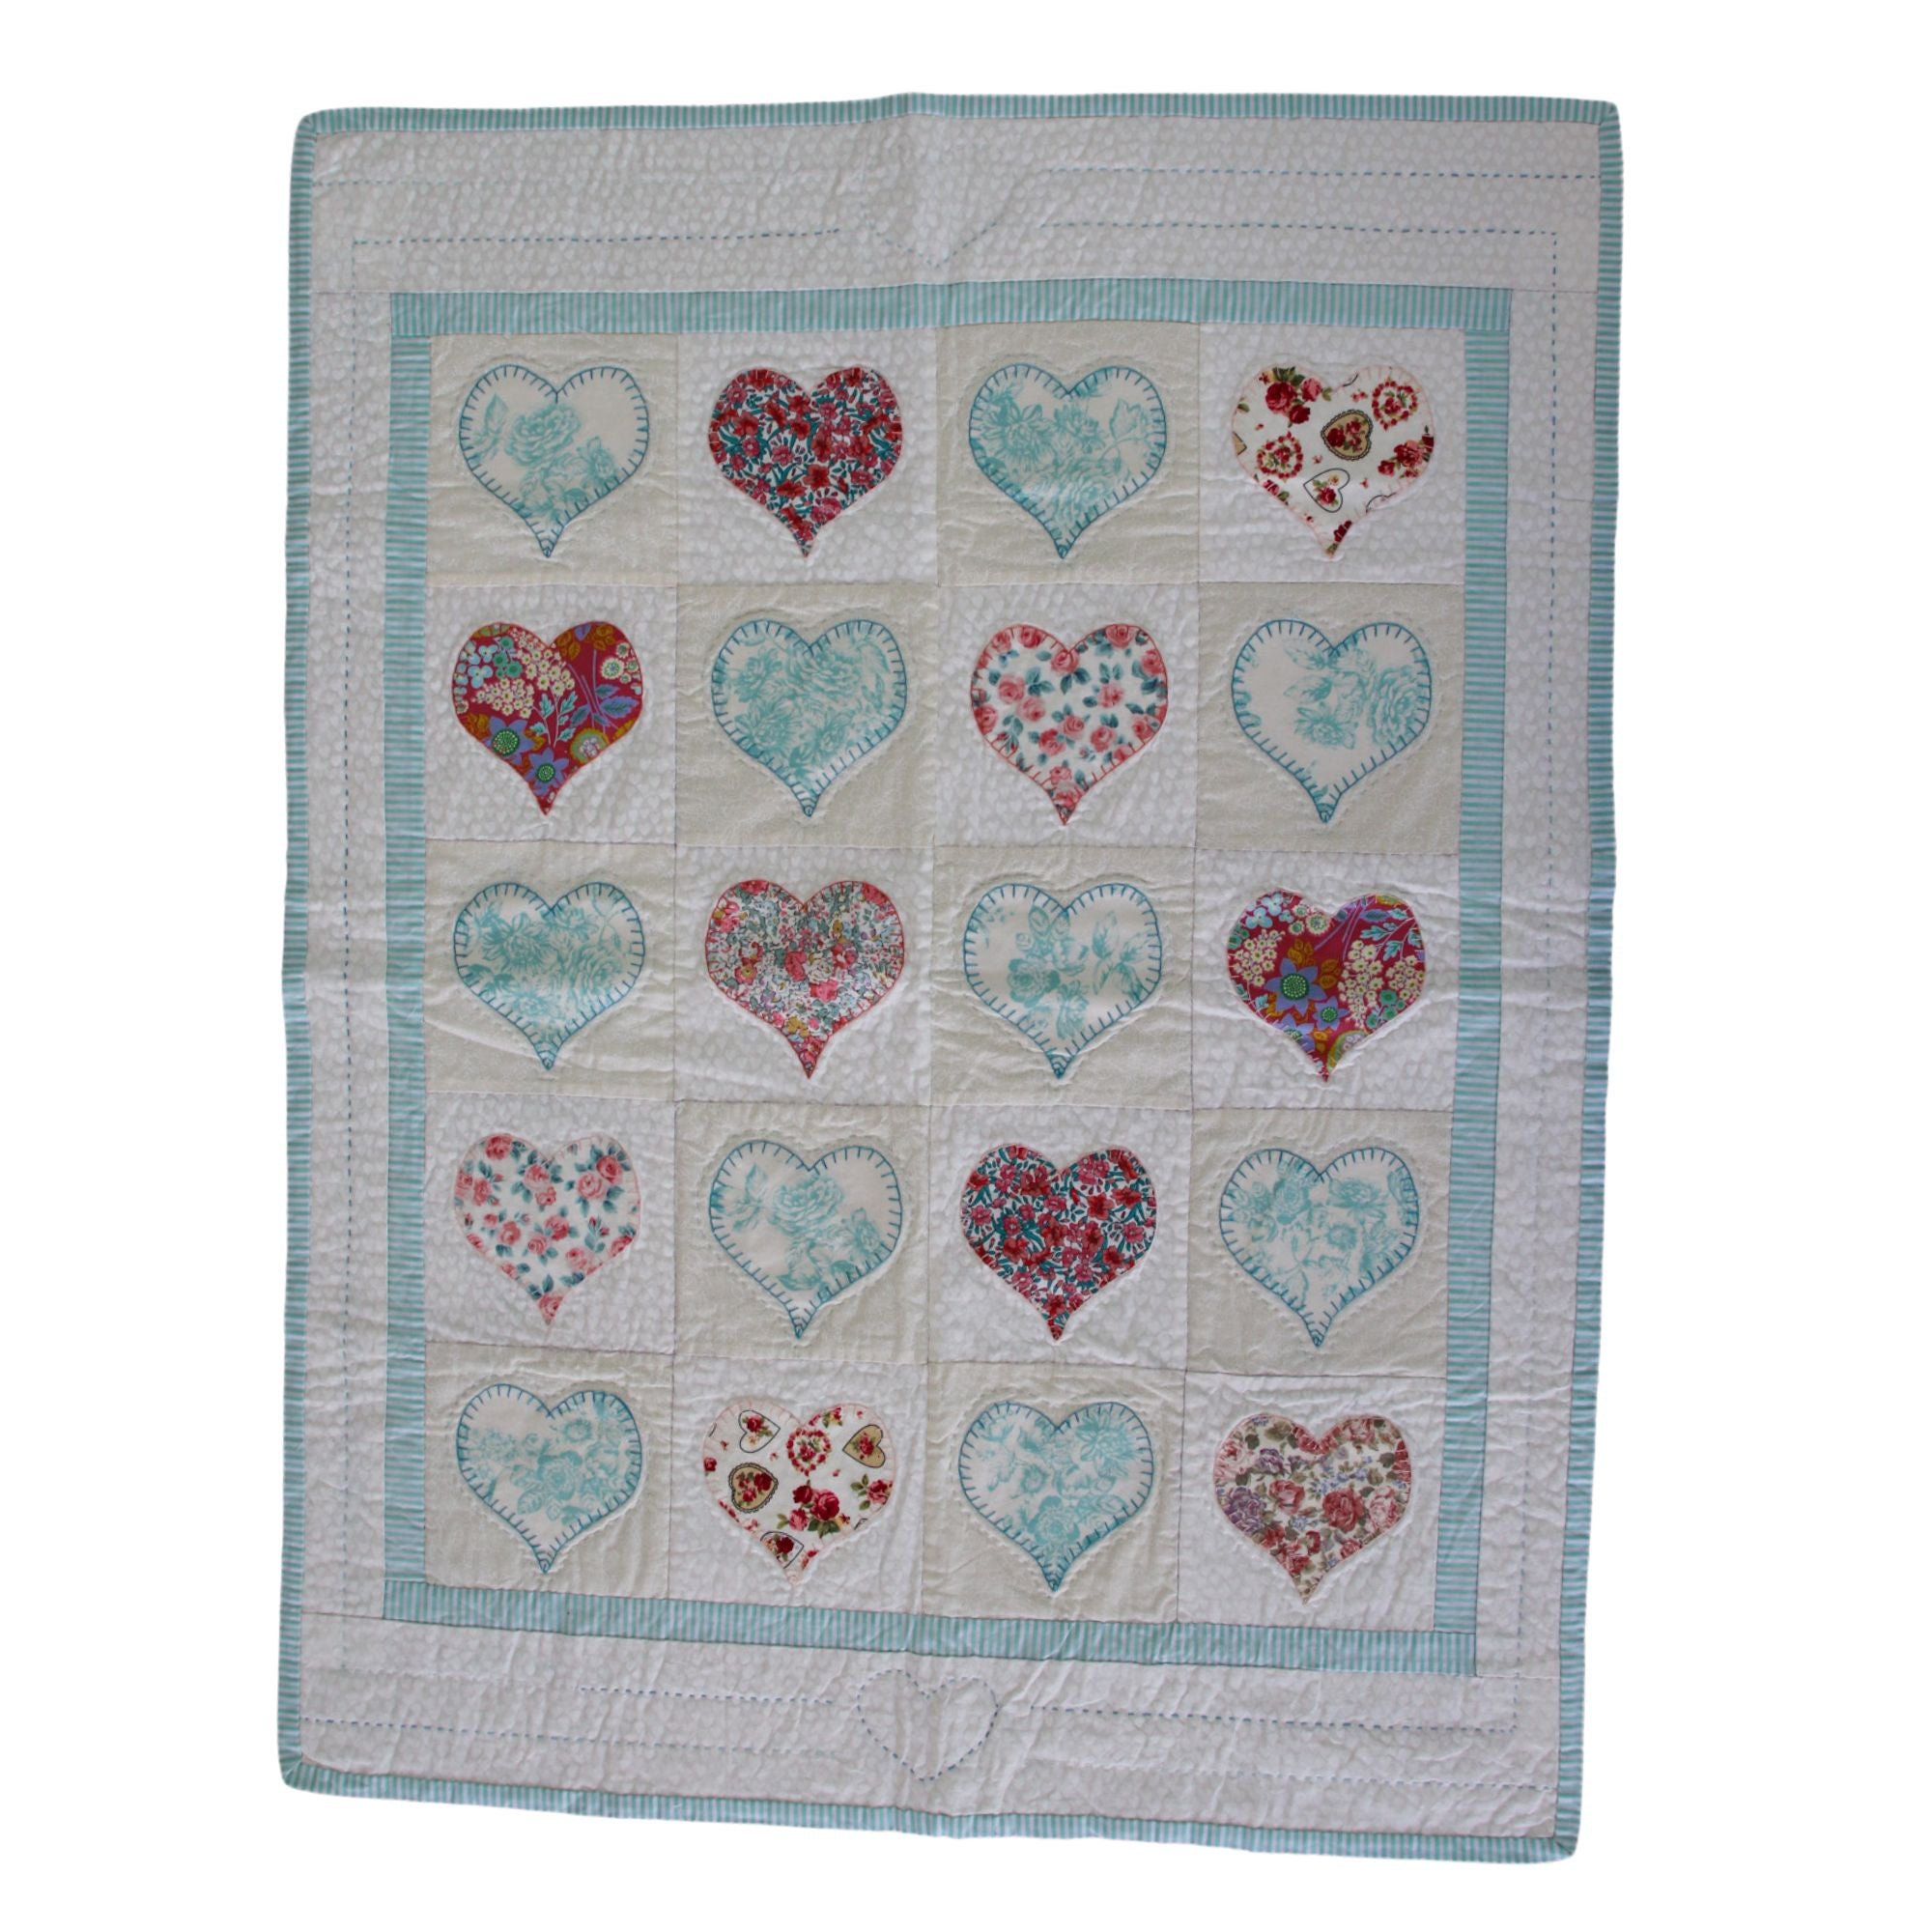 Children's Handmade 'Hearts in the Right Place' Quilt